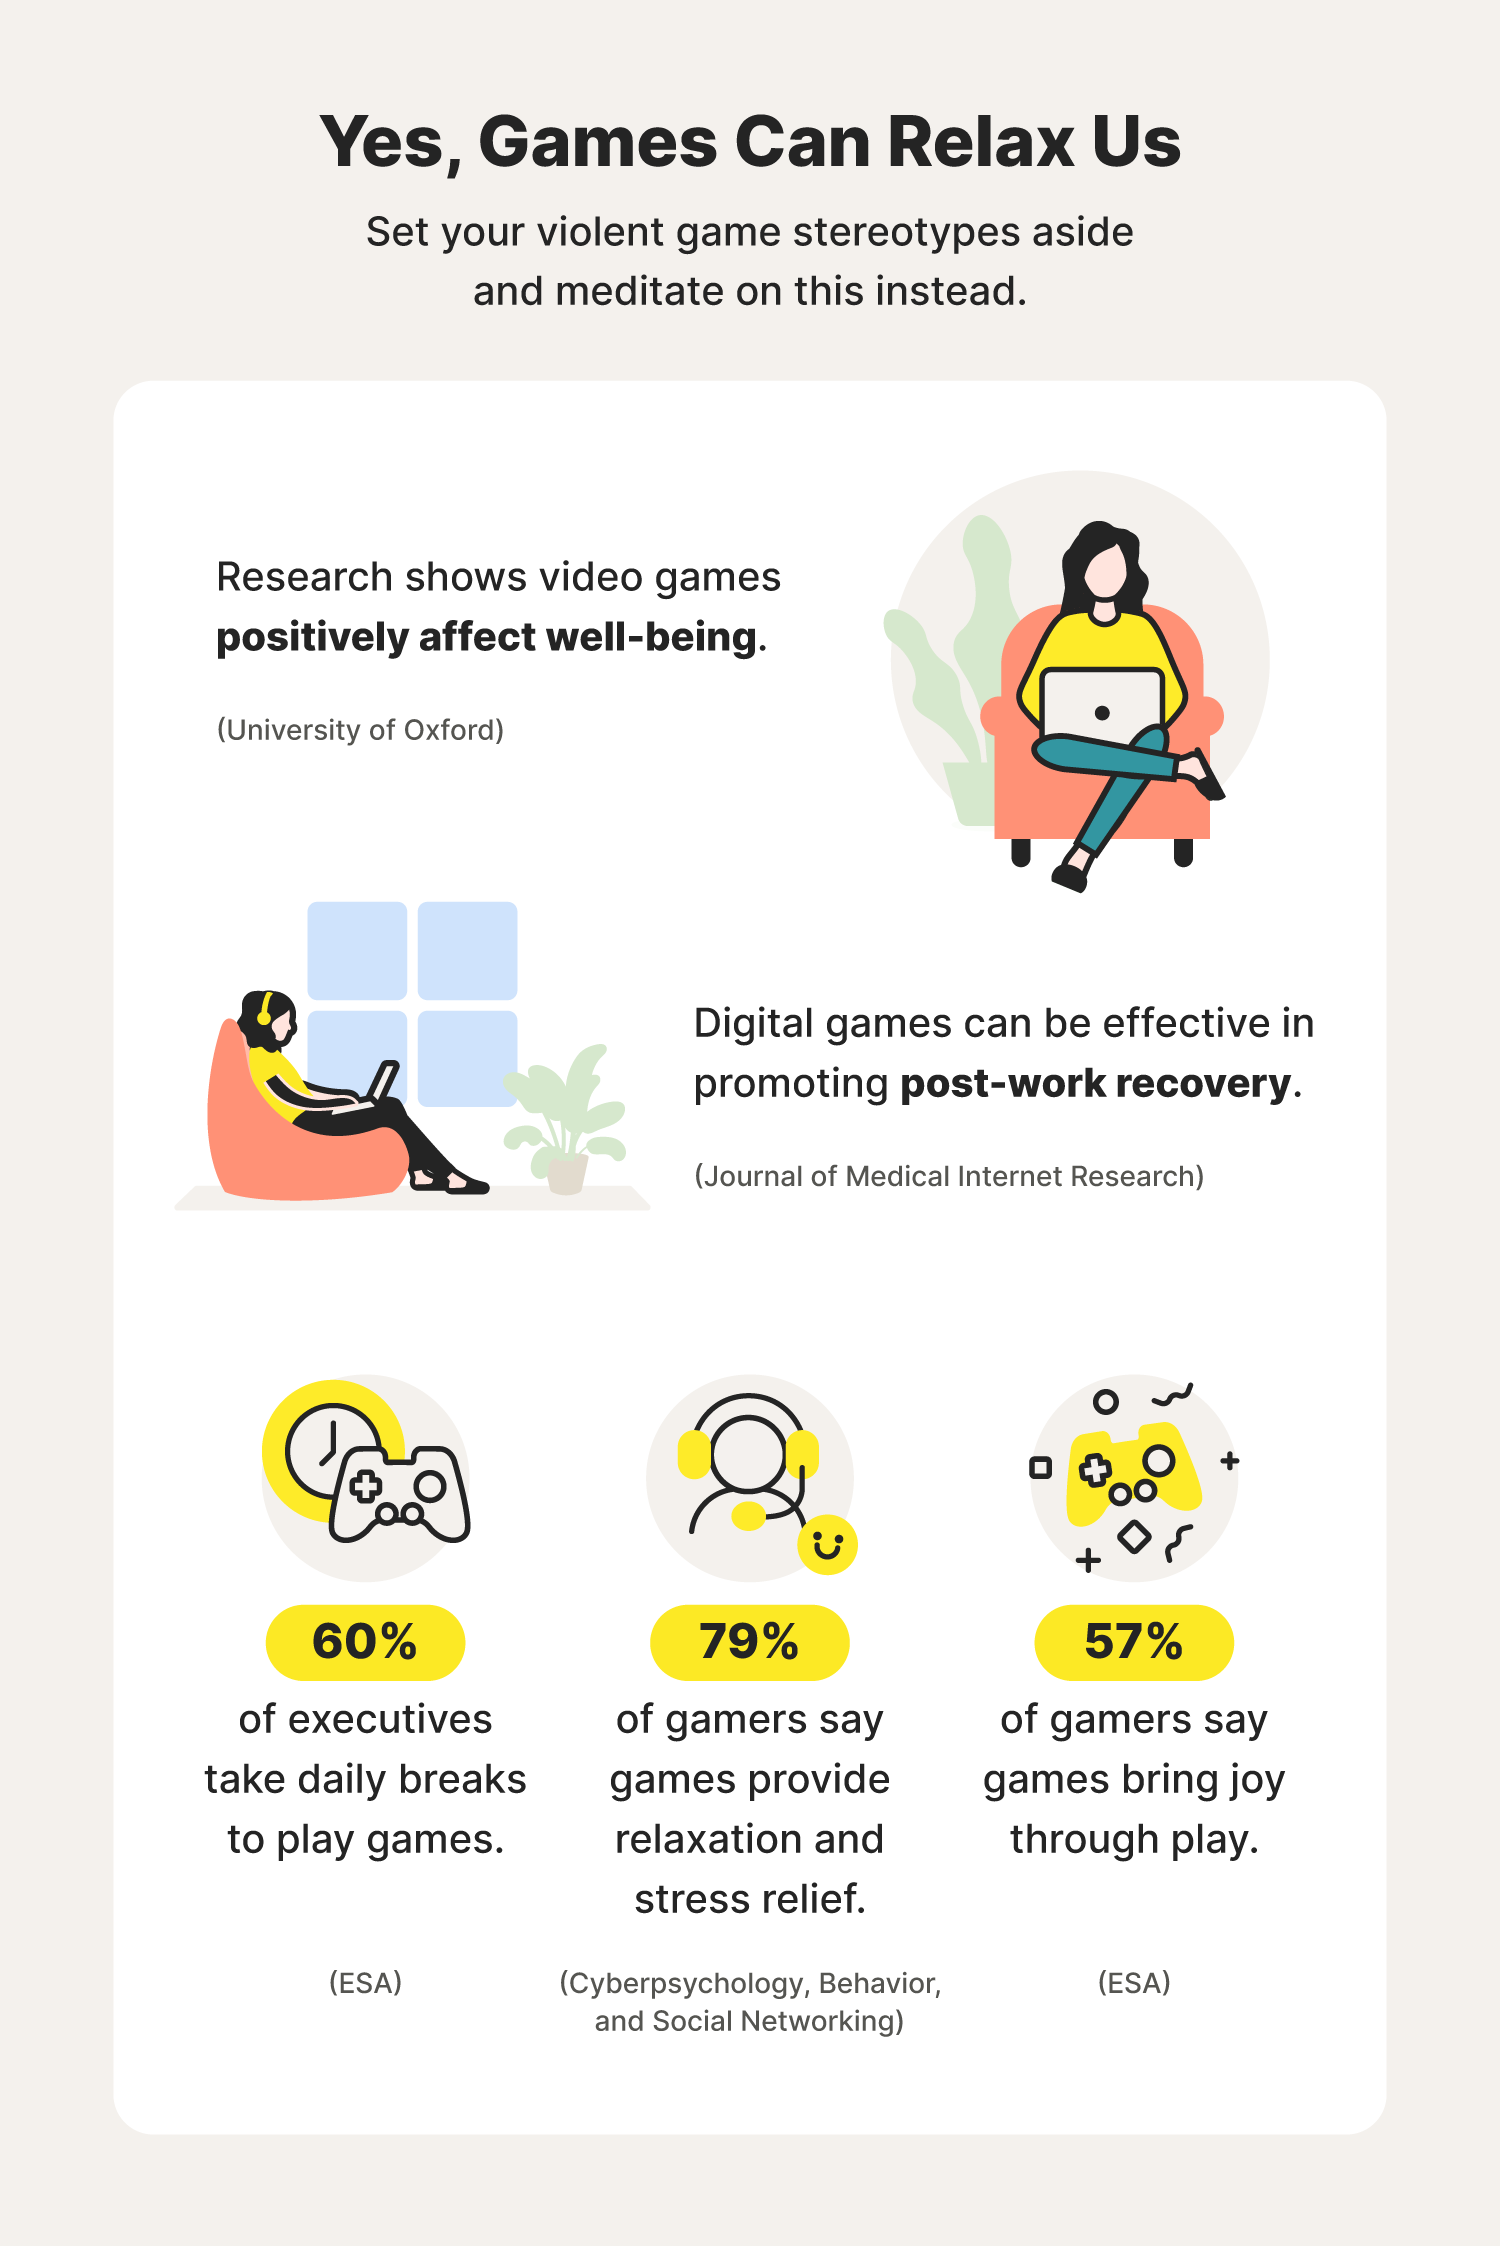 Five illustrations help depict the benefits of playing relaxing games at home. 